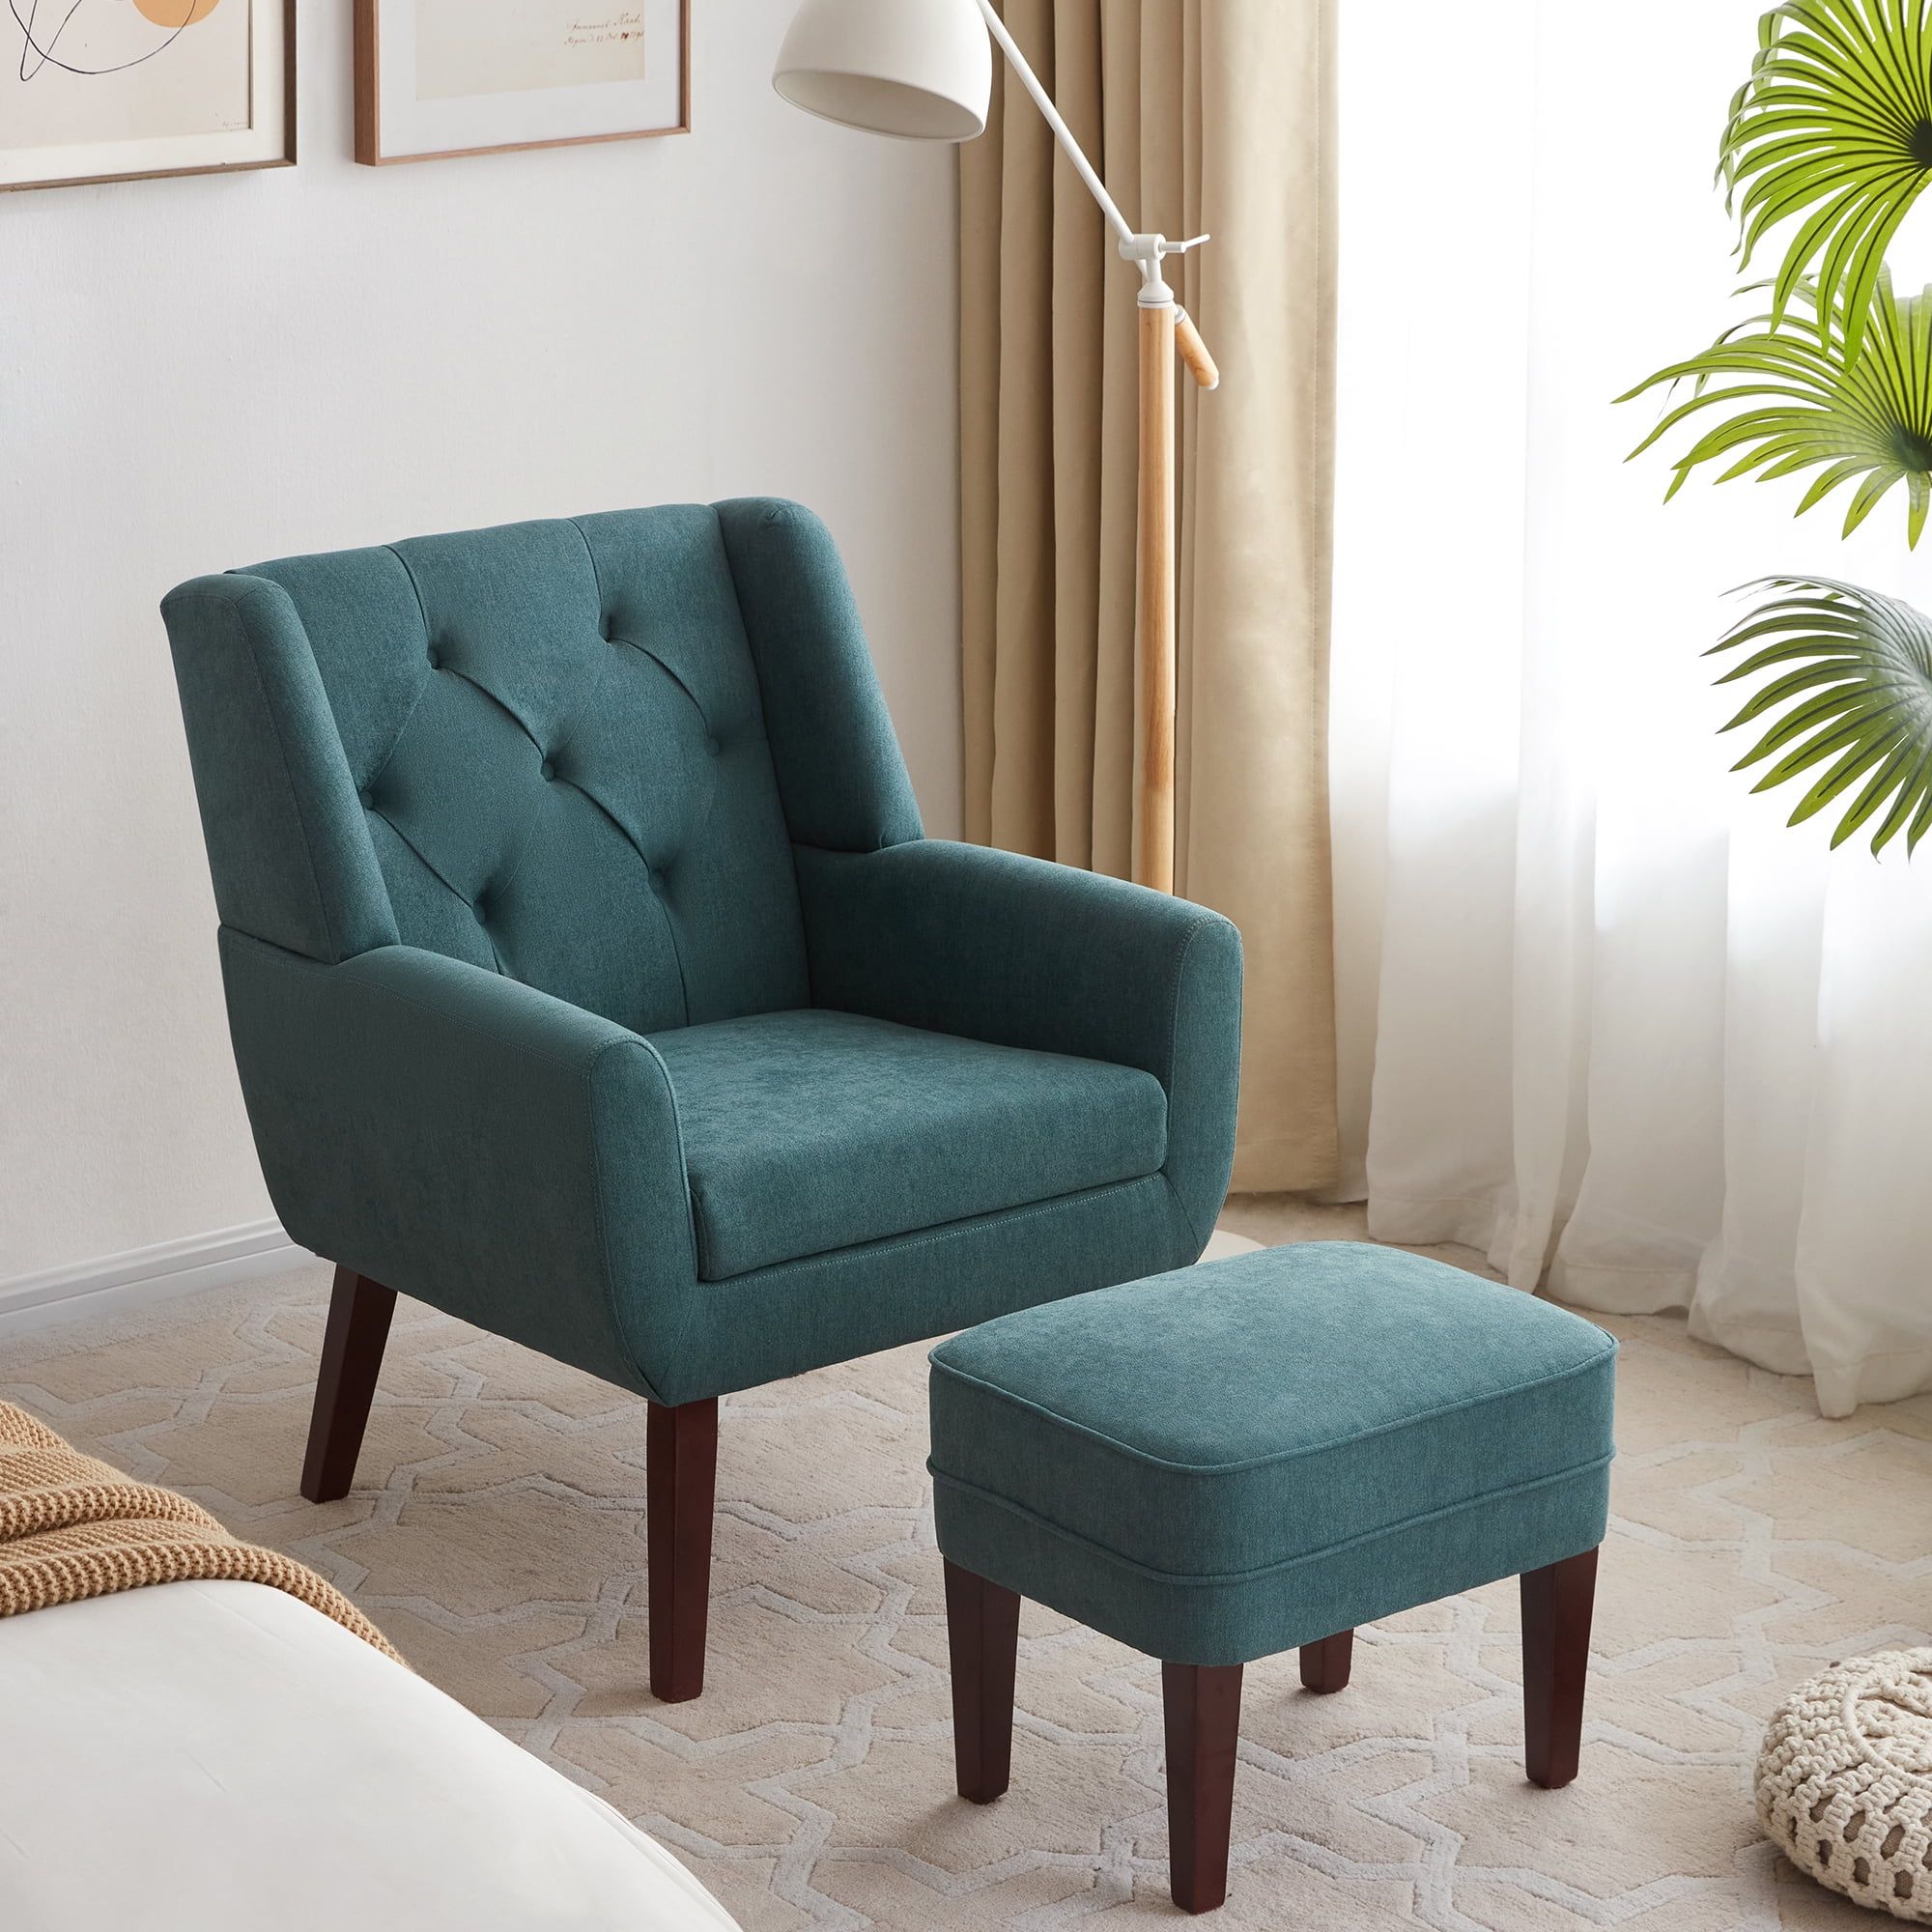 Huimo Accent Chair With Ottoman,mid Century Modern Upholstered Button  Tufted Armchair, Linen Fabric Sofa Comfy Reading Chairs For Living Room,  Bedroom,reception Room(dark Teal) – Walmart For Comfy Reading Armchairs (View 6 of 15)